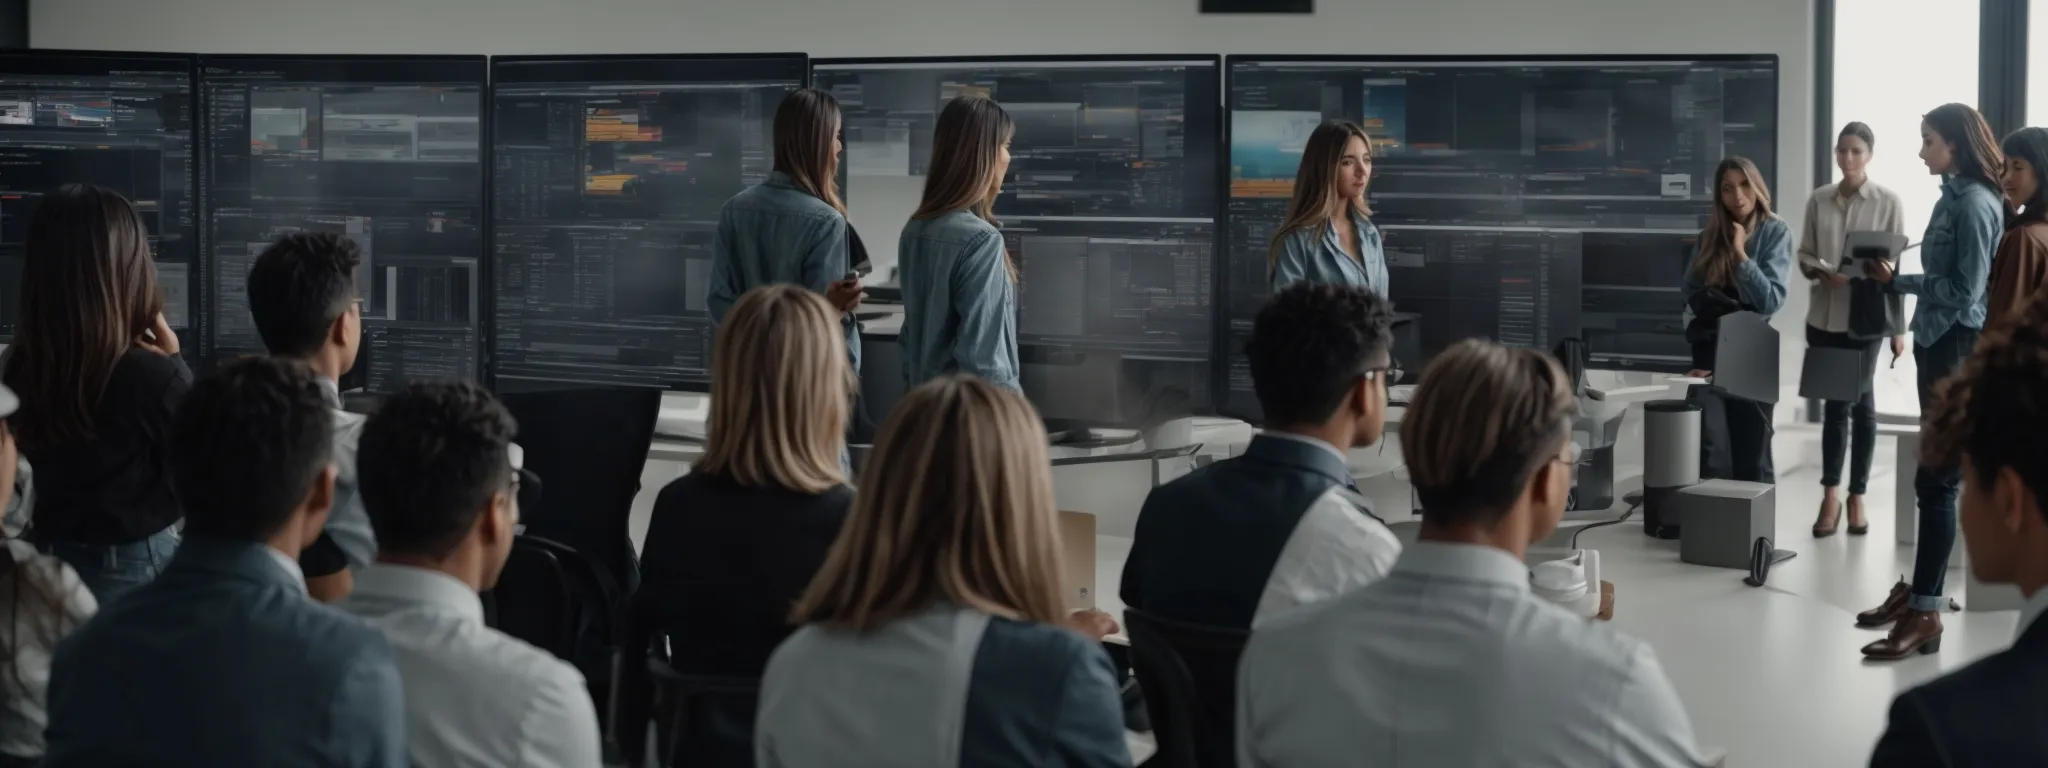 a group of diverse individuals actively engaging with a sleek, modern software interface on a large screen in a bright, collaborative workspace.